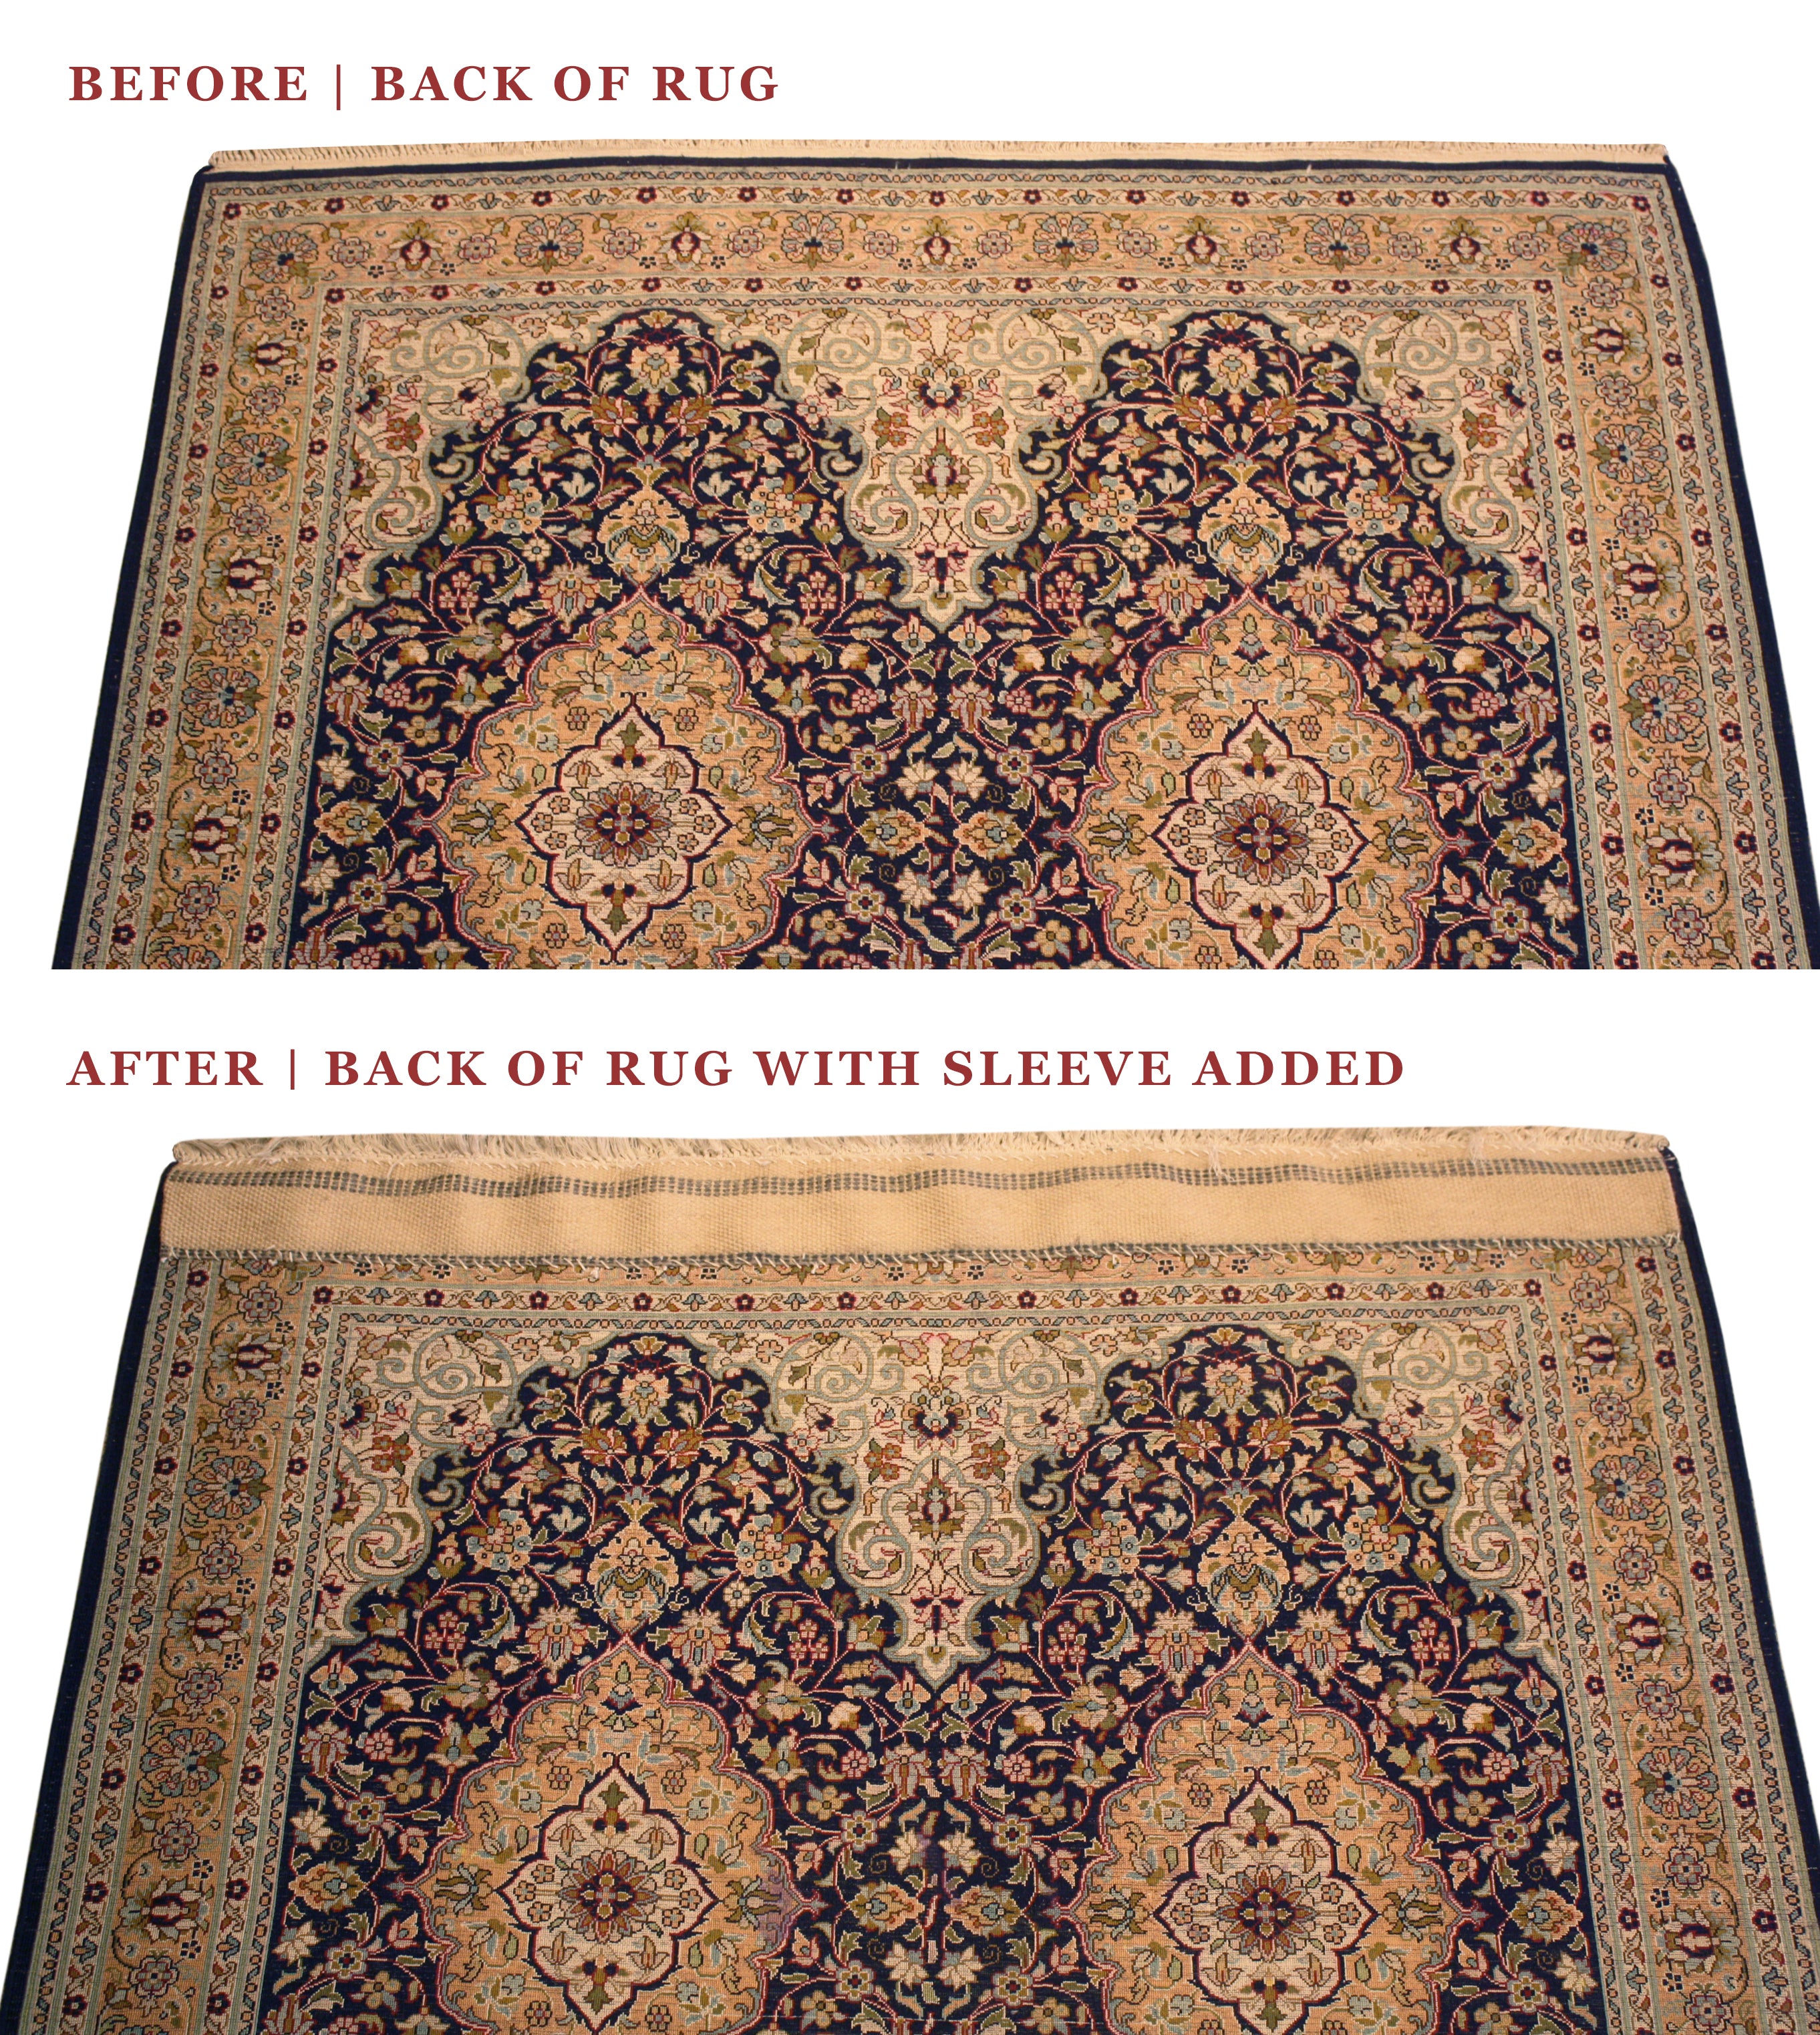 How to hang a rug on the wall with sleeve